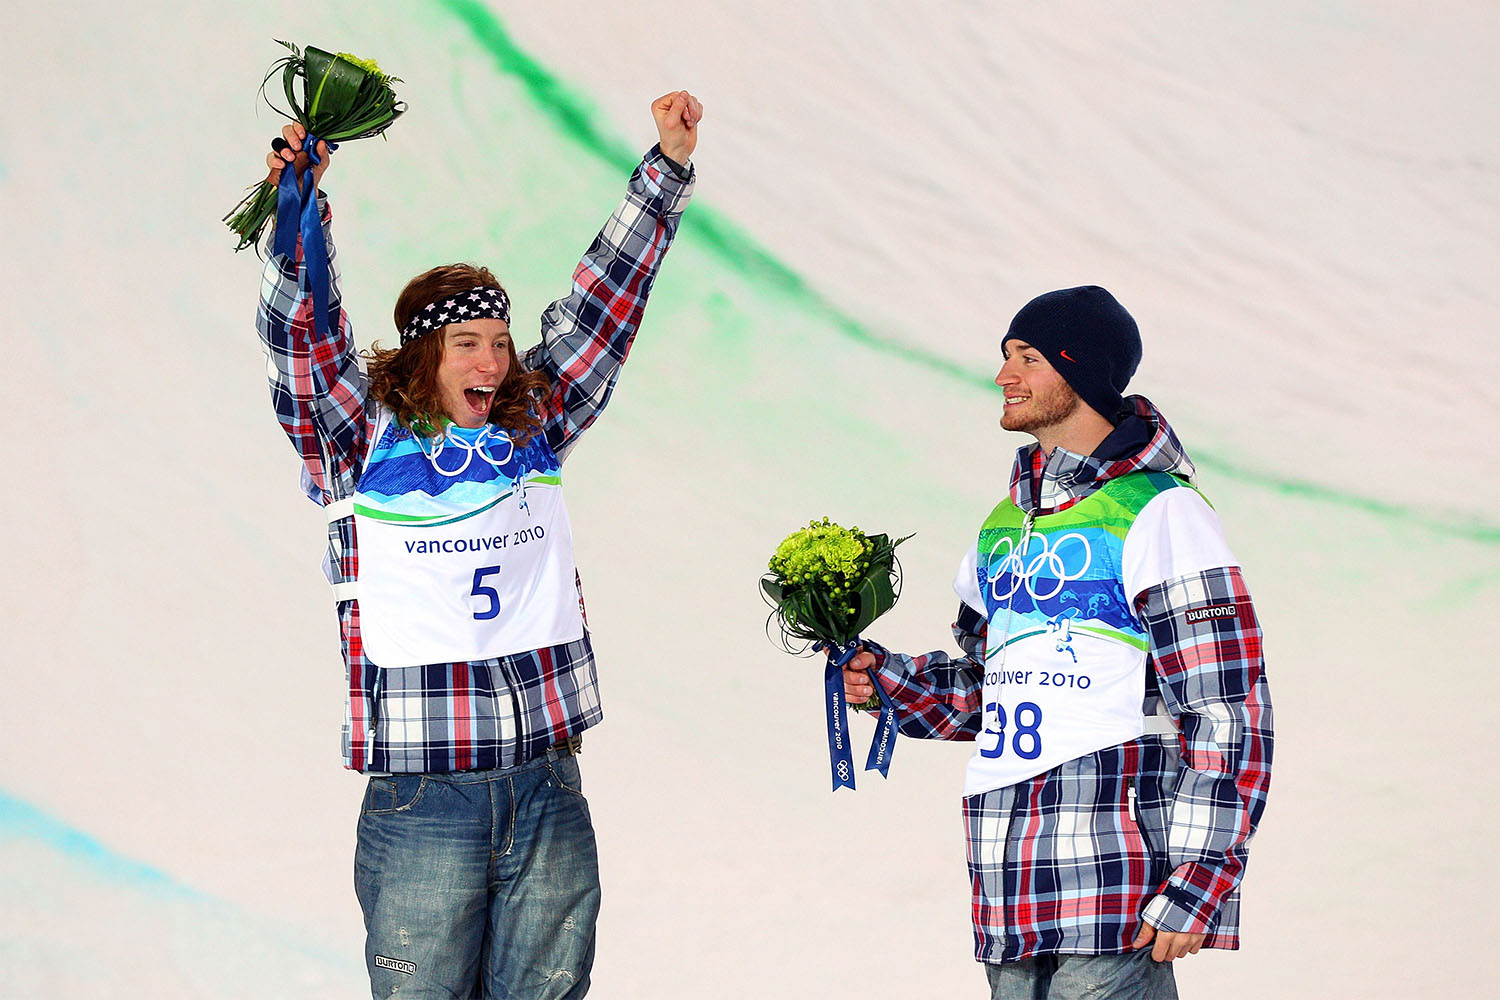 Shaun White celebrating after an olympic gold, 2010